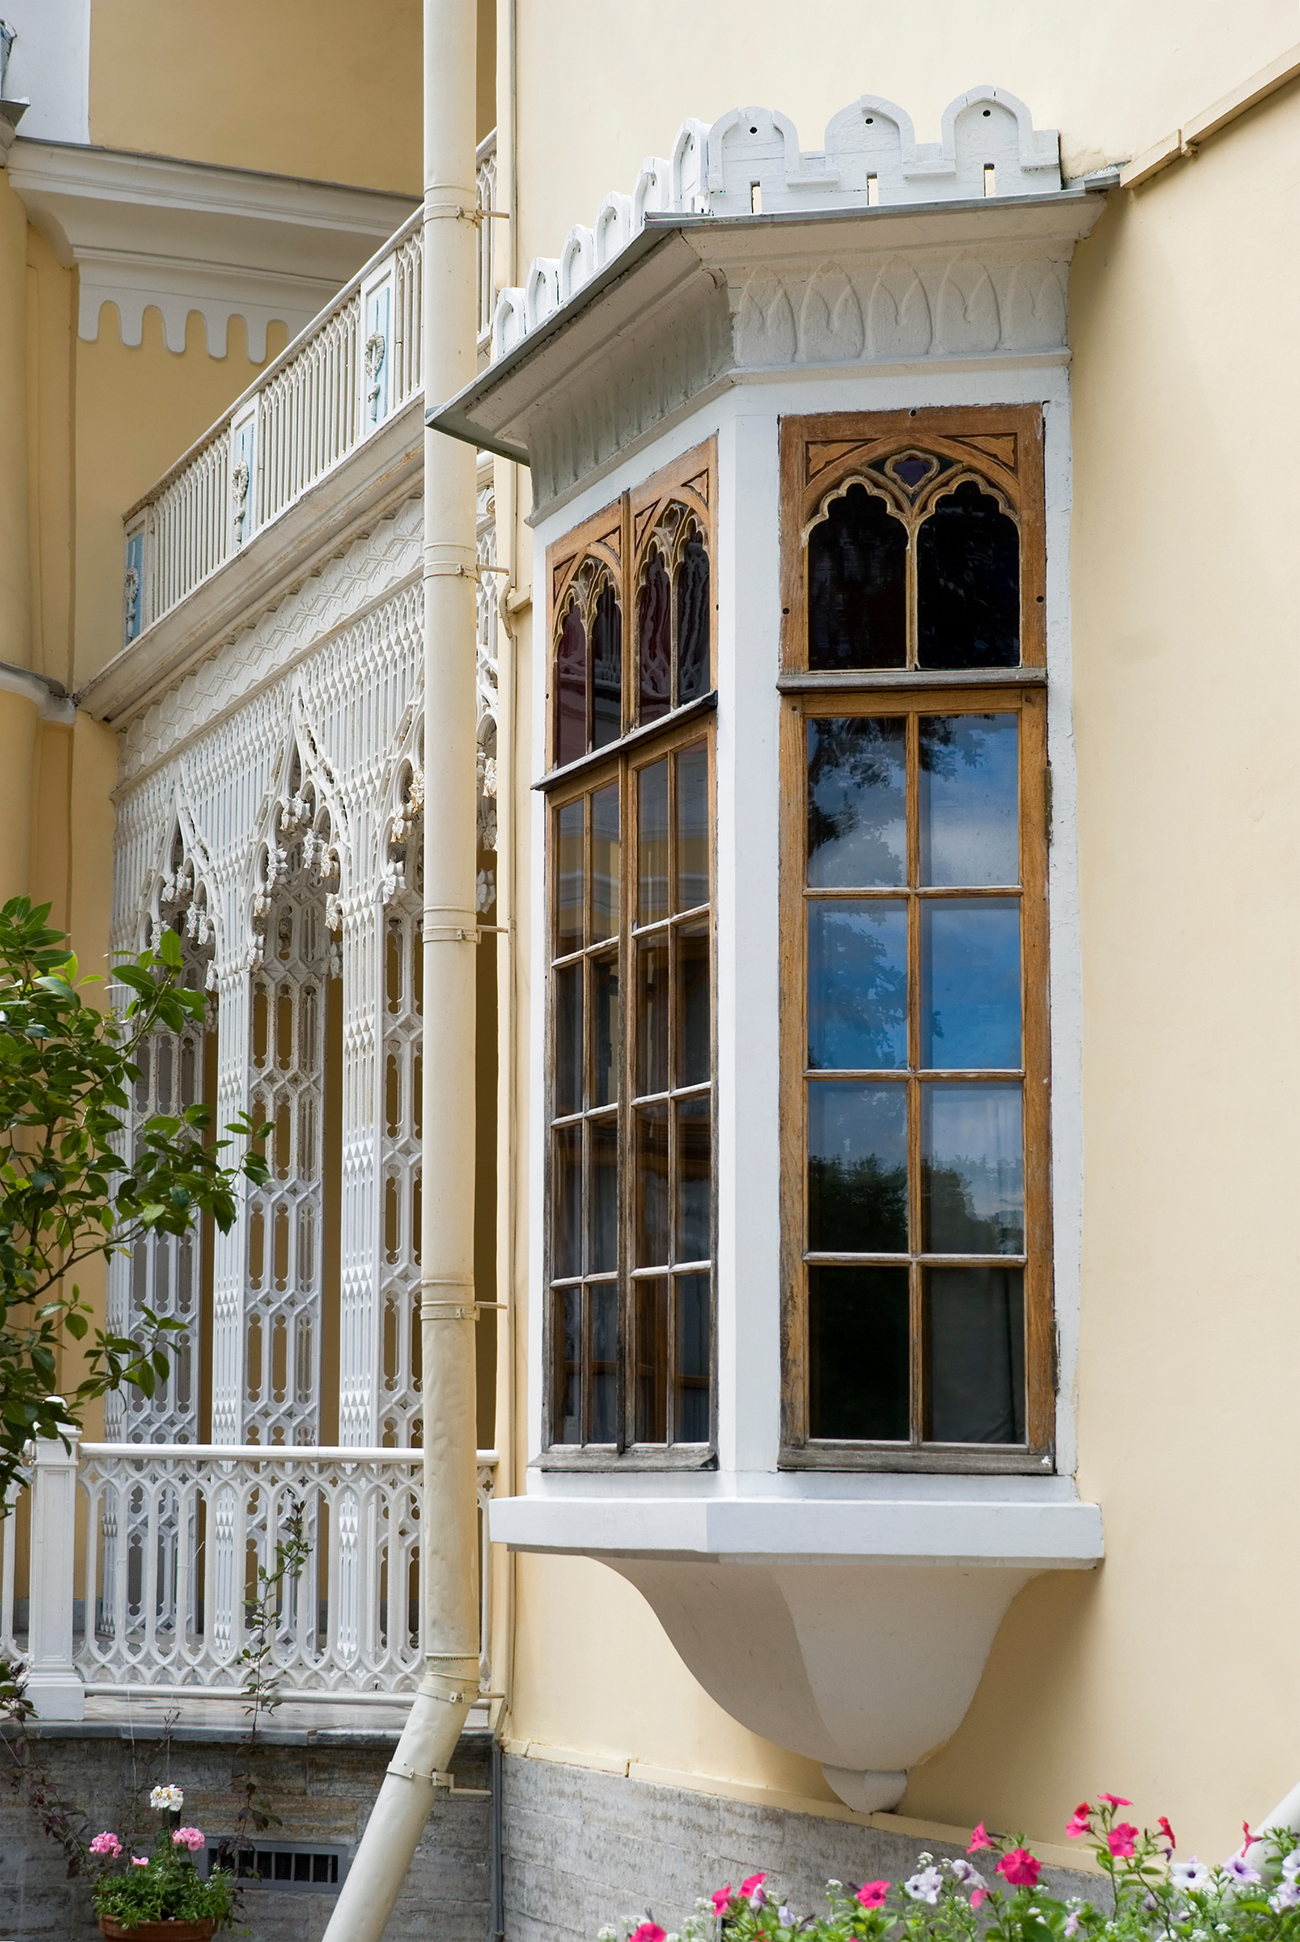 Bay window of the palace, neo-Gothic style. Source: Legion Media